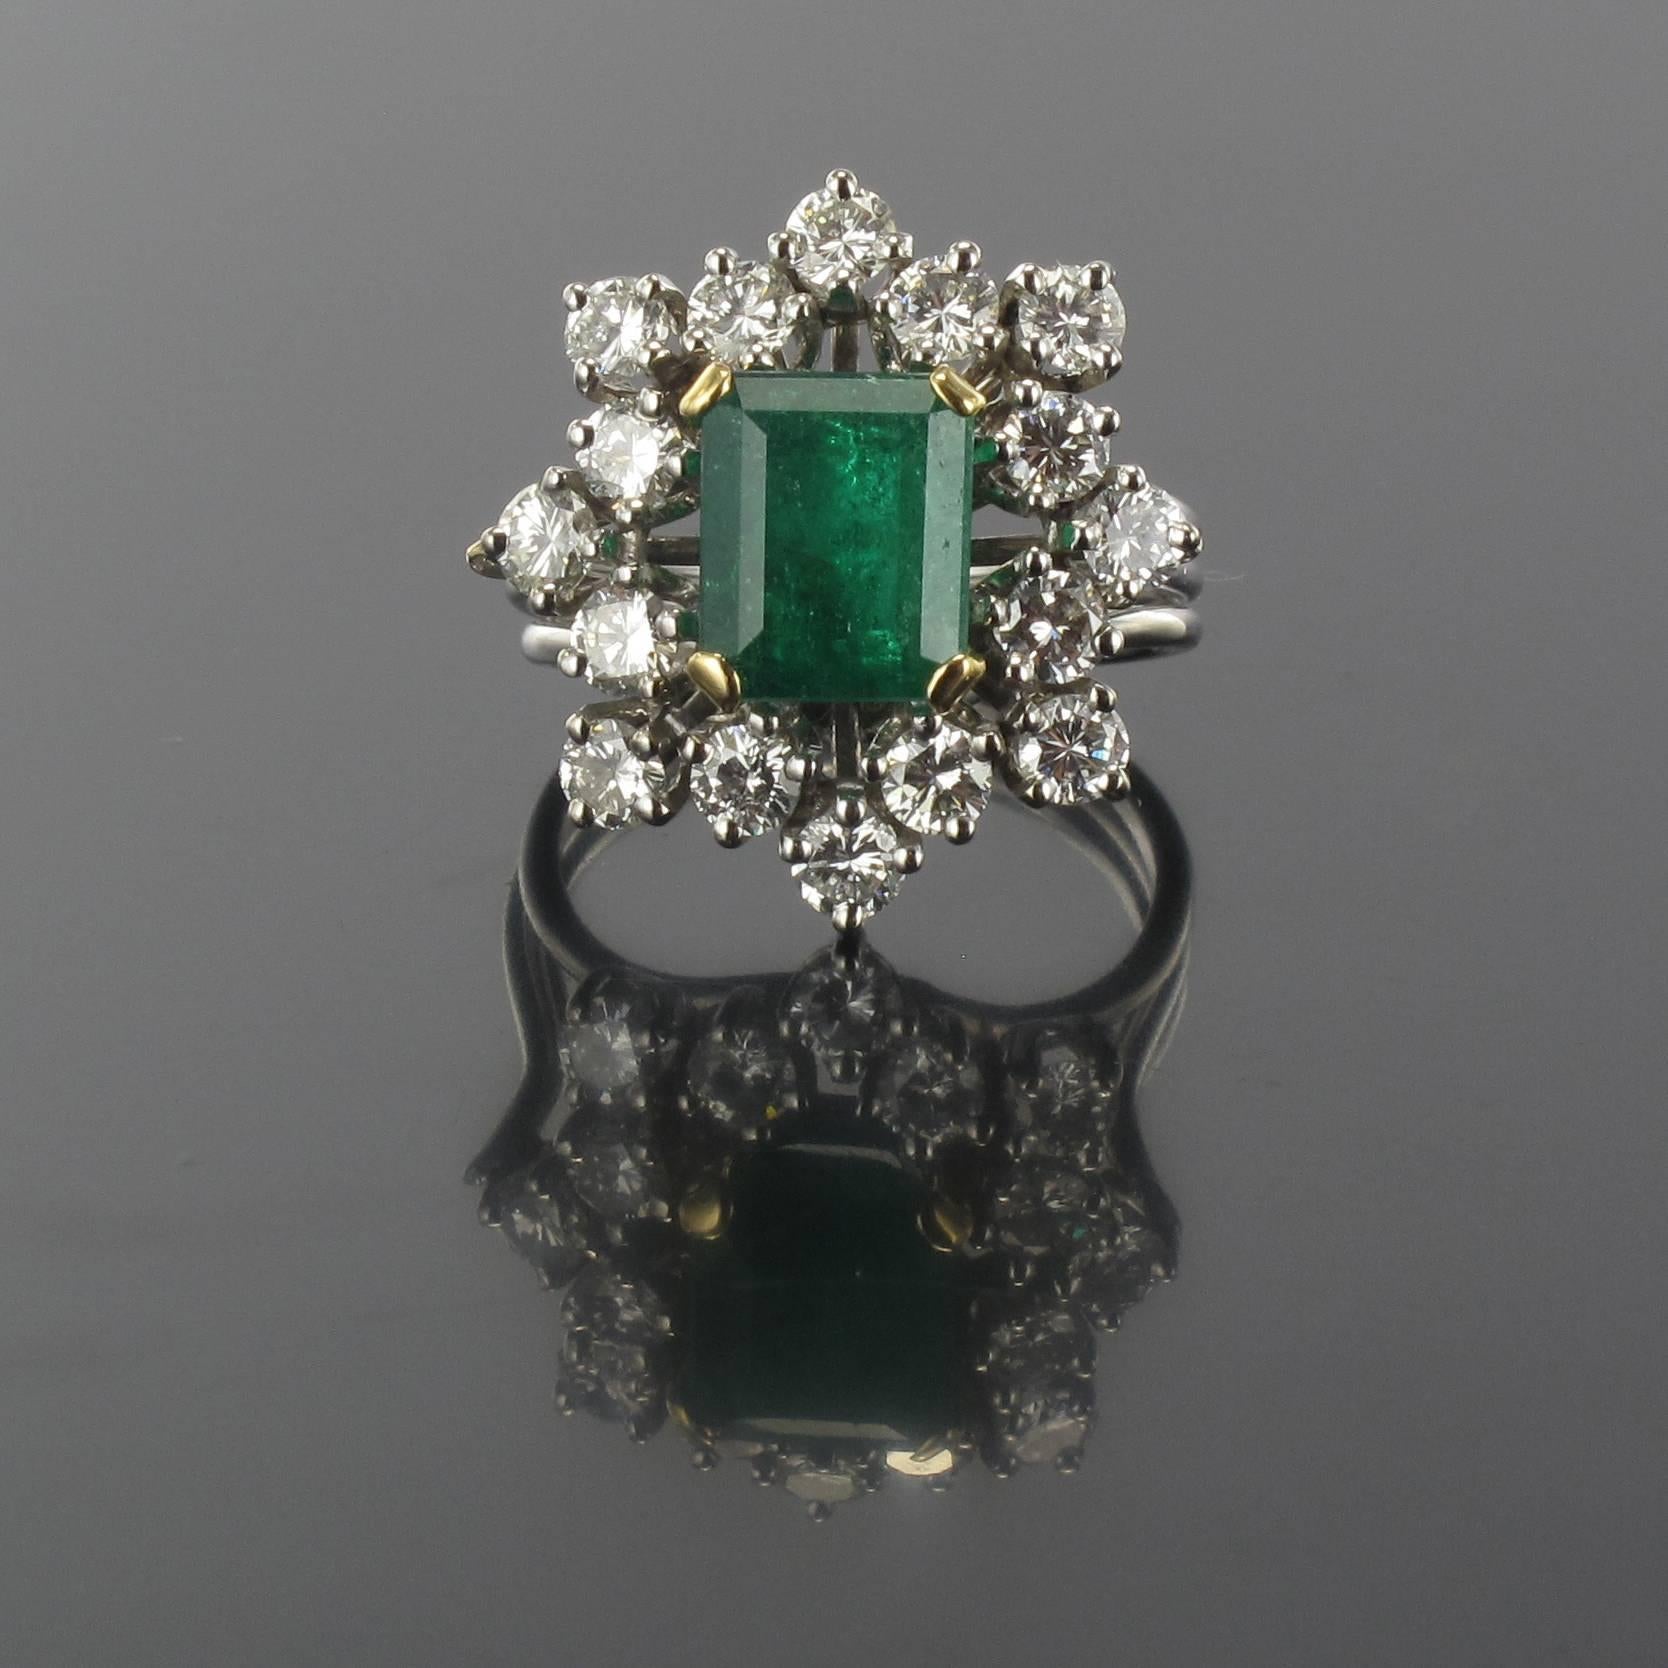 Ring in 18 carat white gold, eagle head hallmark. 

This impressive ring is claw set in yellow gold with an emerald cut emerald surrounded with 16 claw set brilliant cut round diamonds. The ring band is composed of three white gold strands that